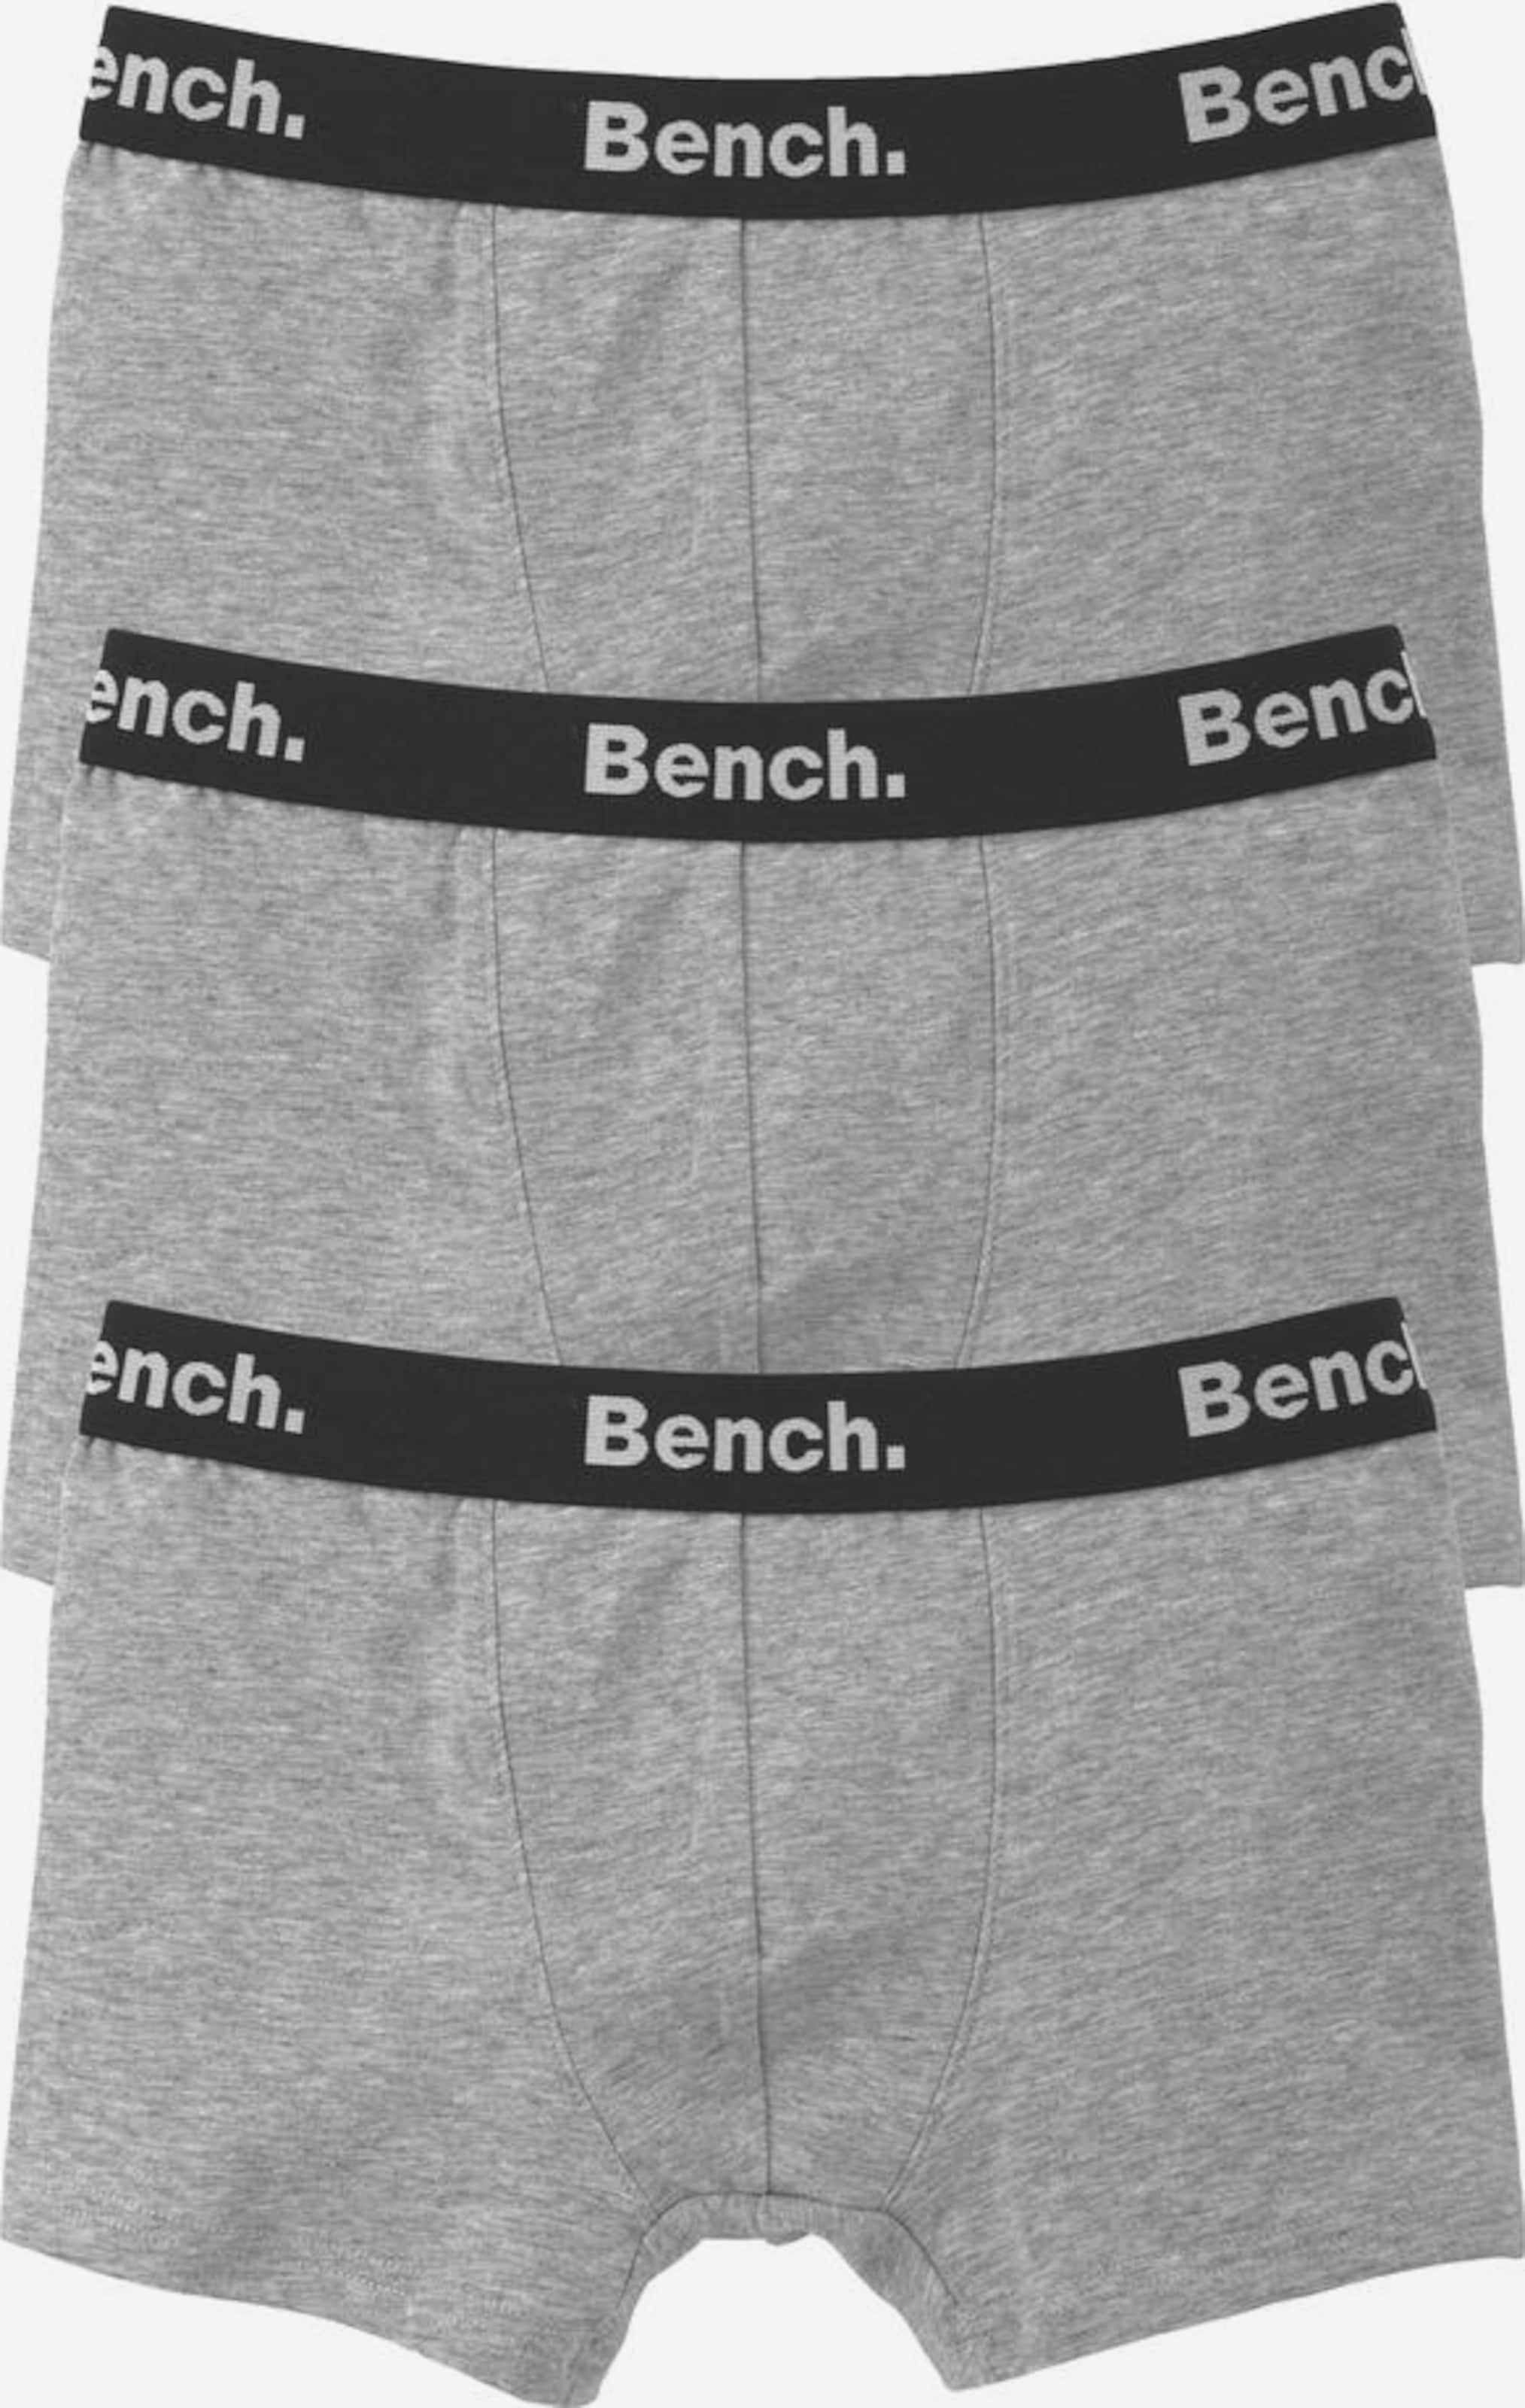 BENCH Boxershorts (3 Stück) in Graumeliert | ABOUT YOU